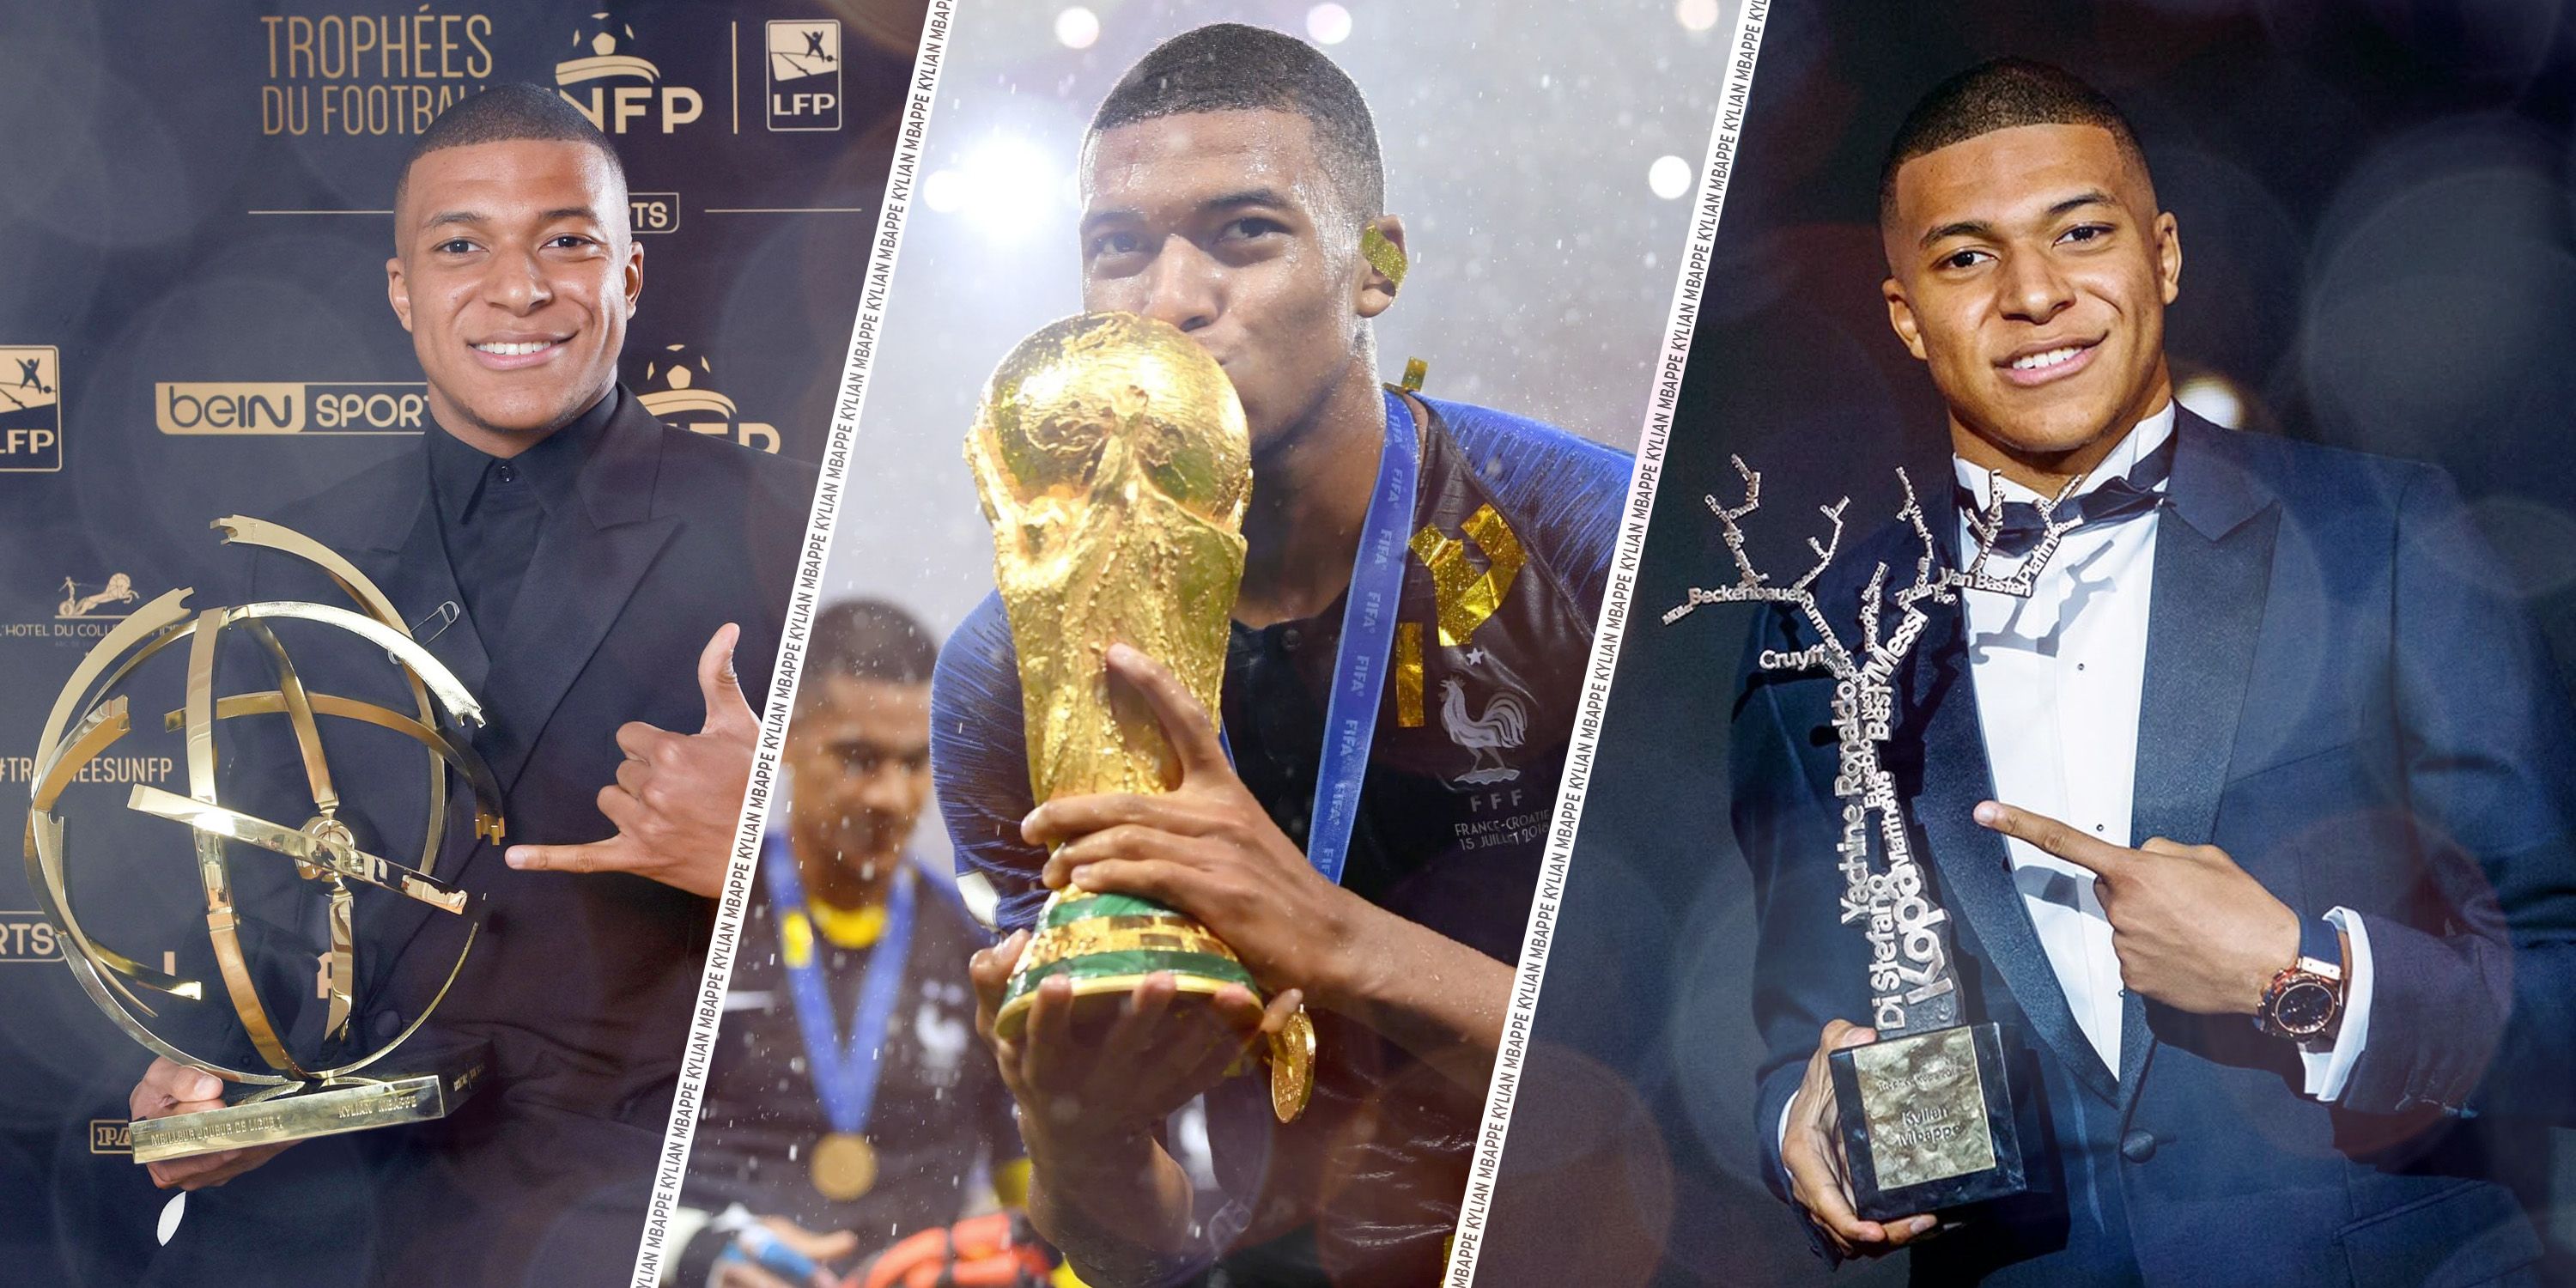 Kylian Mbappe's best moments in his career